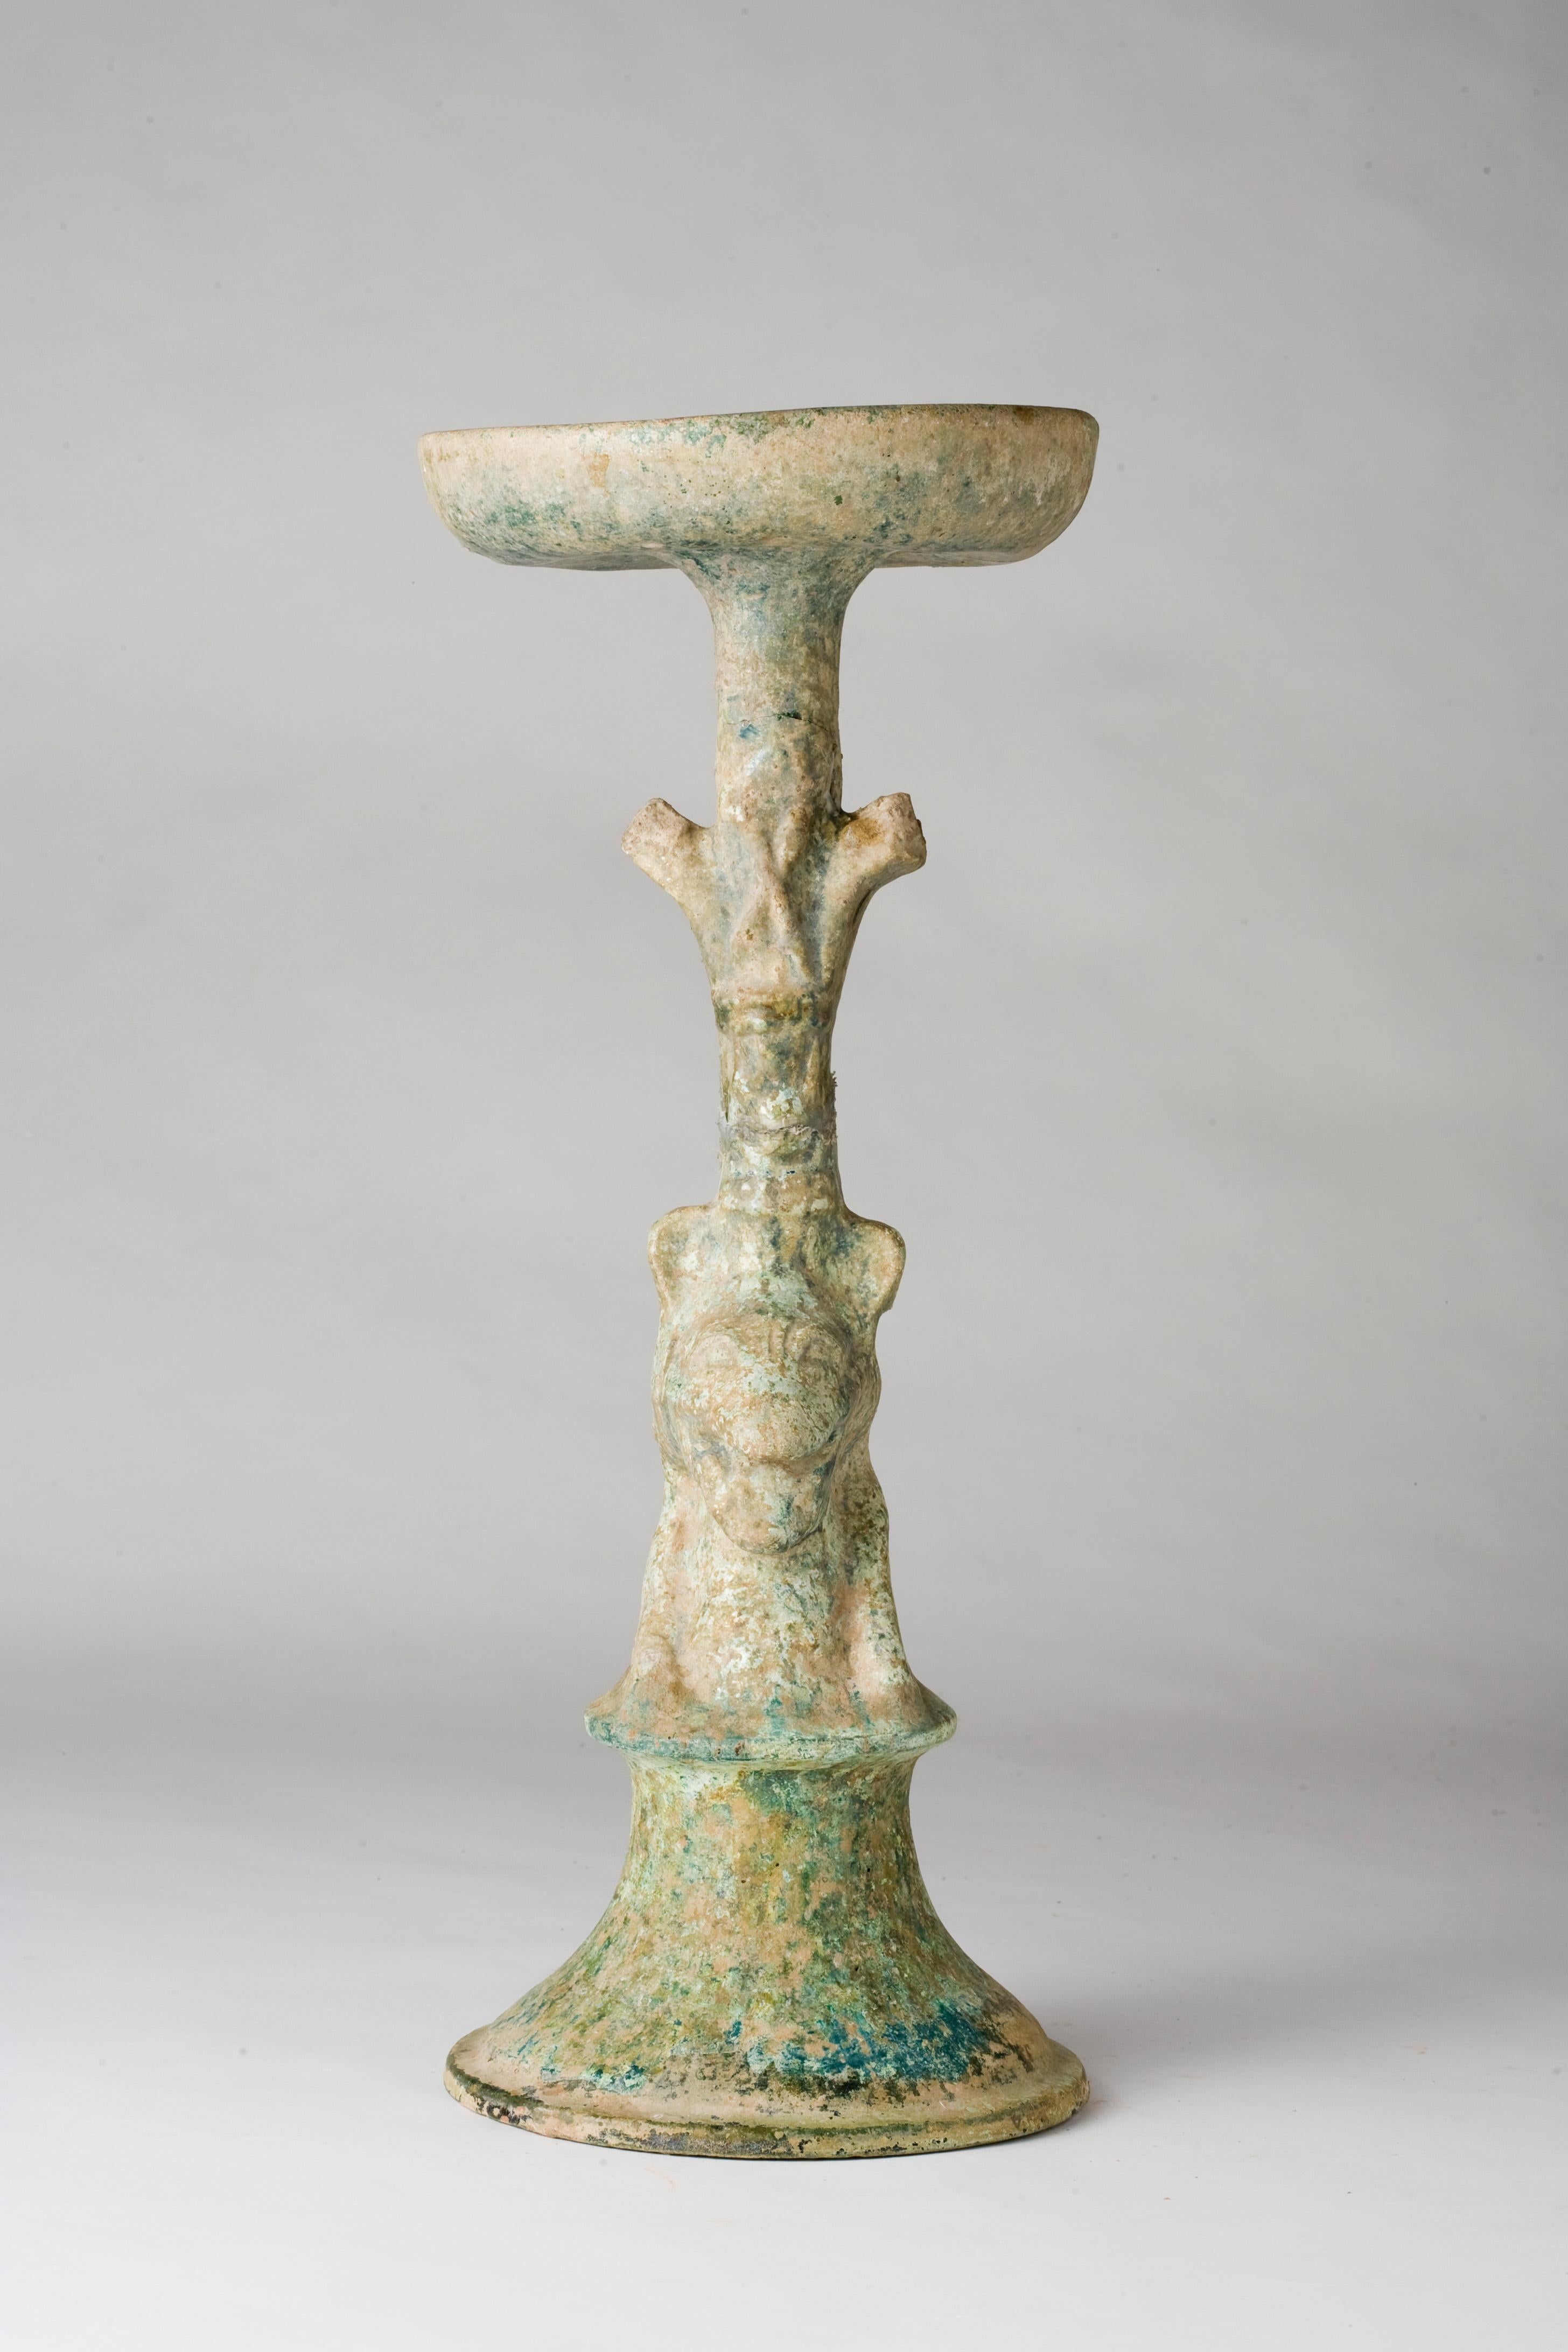 The upper section of the vessel is broad and flat, intended to support a candle or an oil lamp, while the stem and base are robust, designed for stability and durability. The surface is coated with a green glaze, which has matured over centuries to